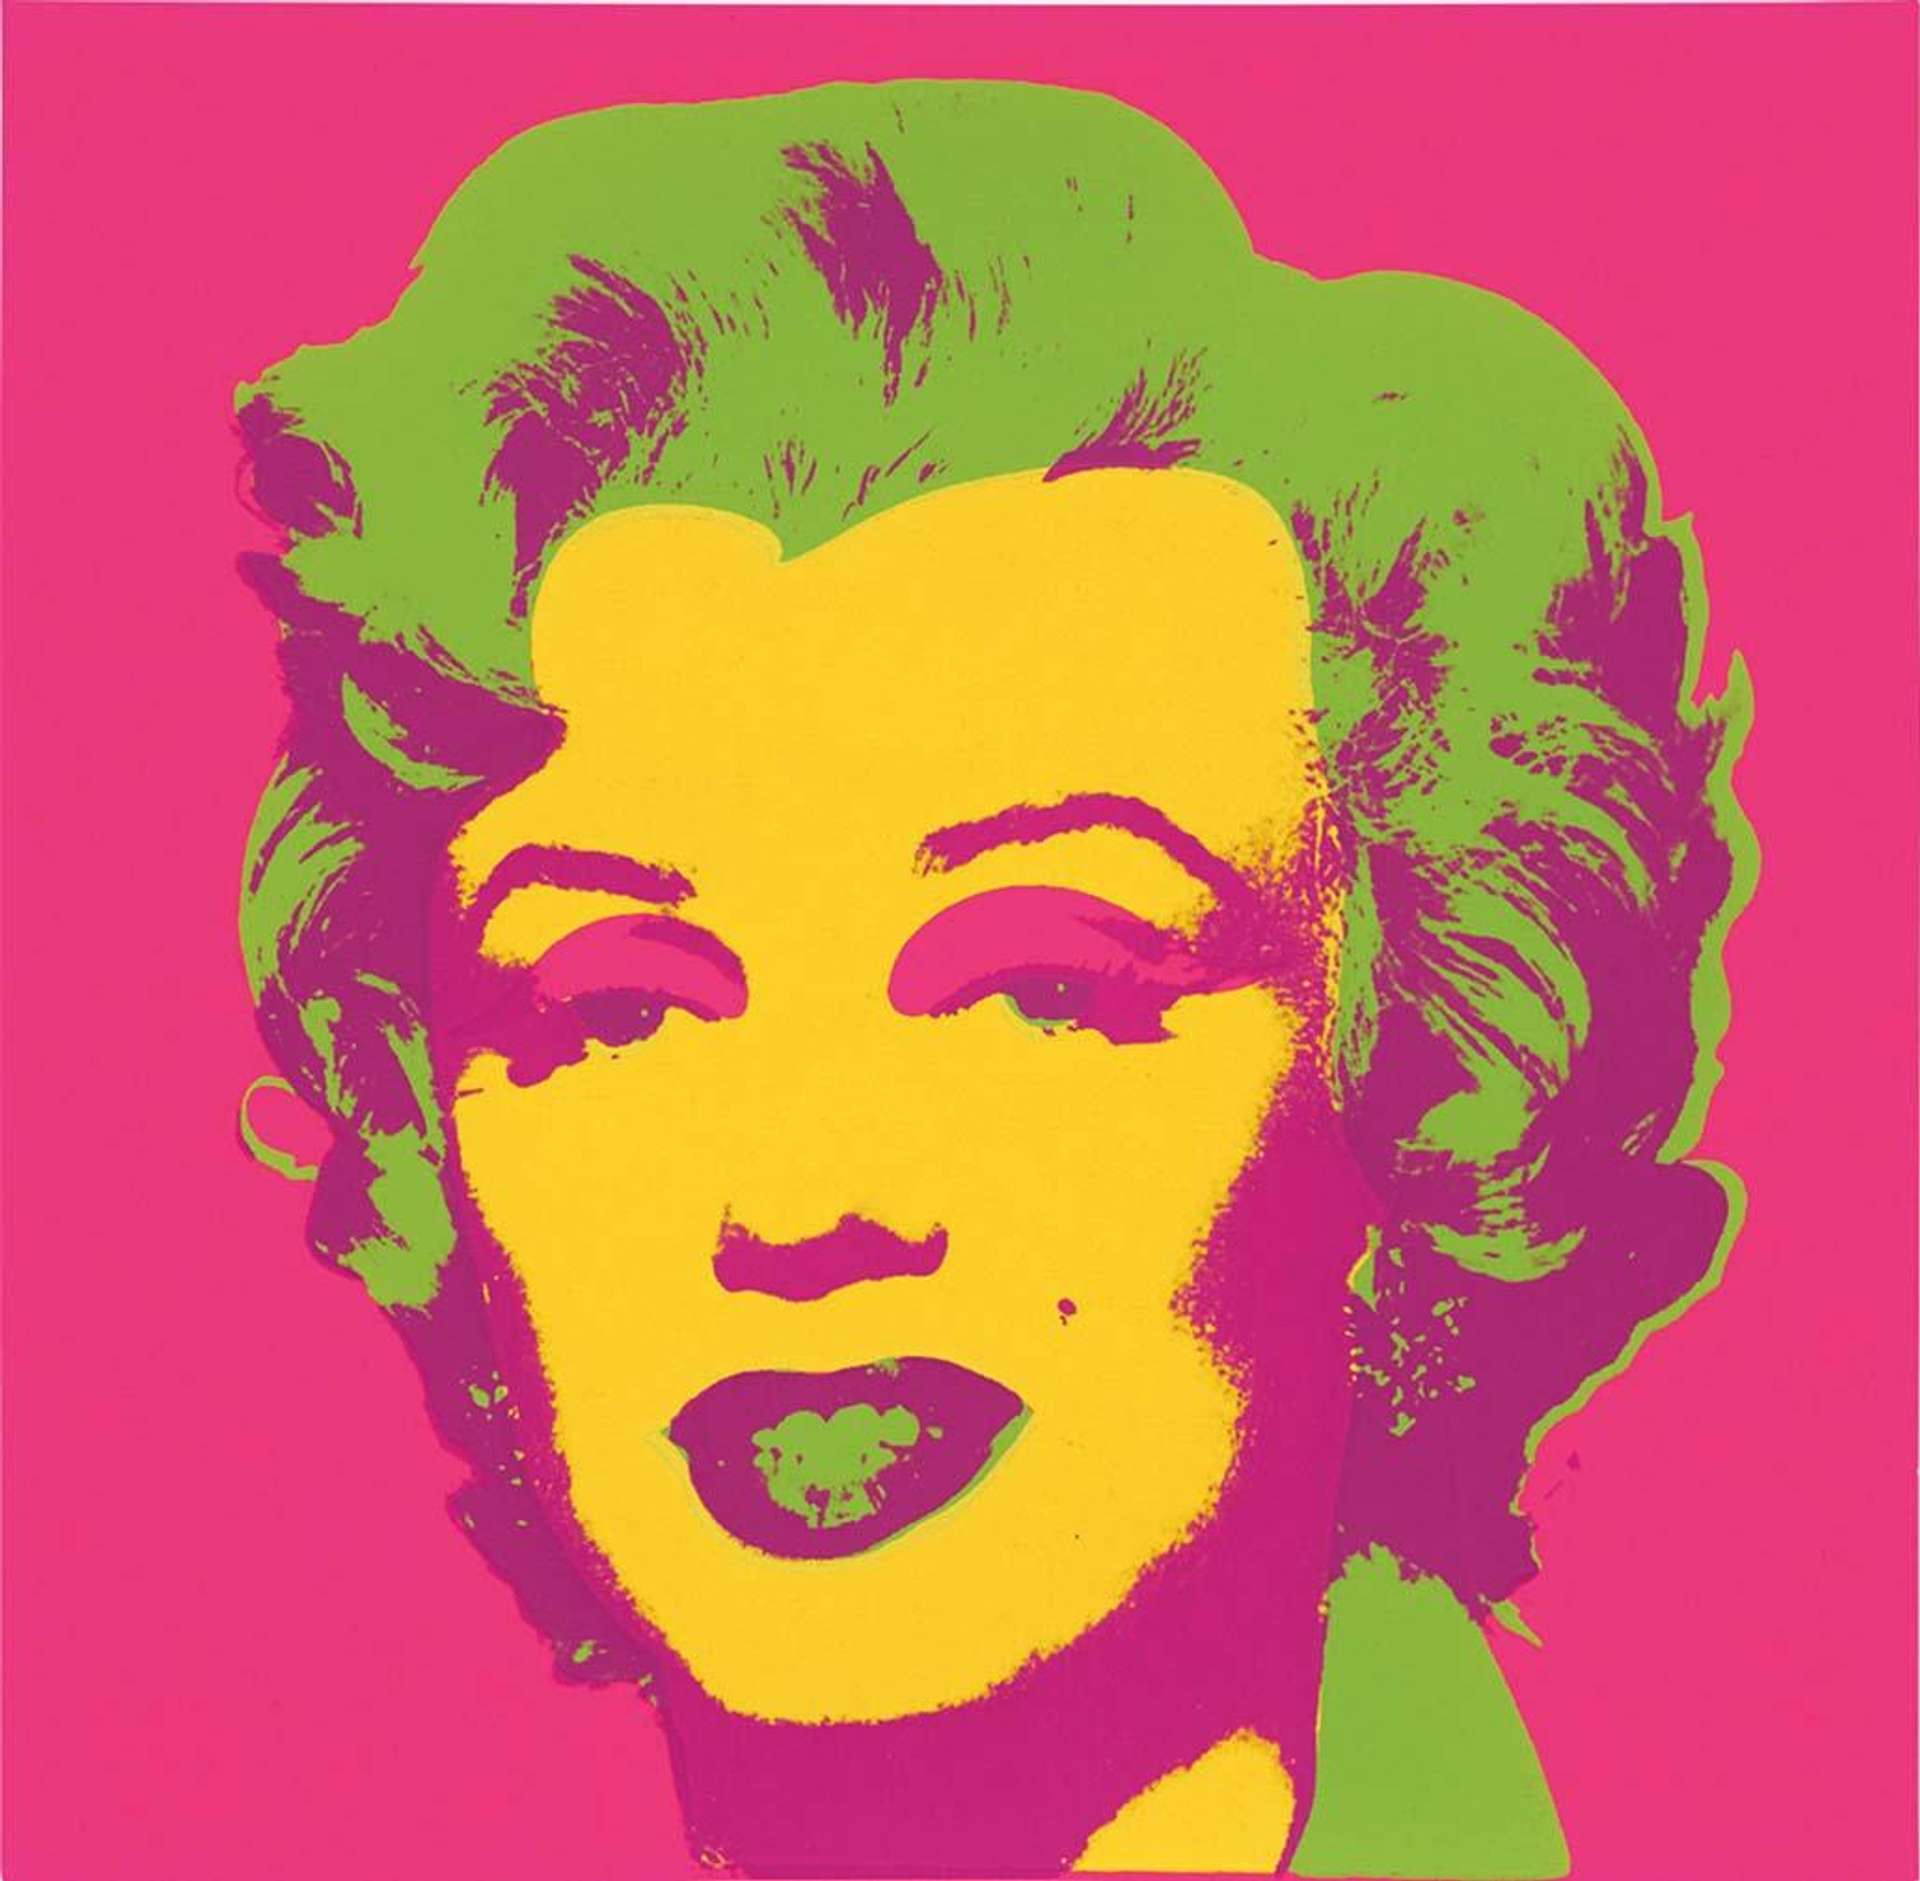 A vibrant pop art-style screen print of Marilyn Monroe with a bright yellow face and green hair on a vibrant fuchsia pink background.